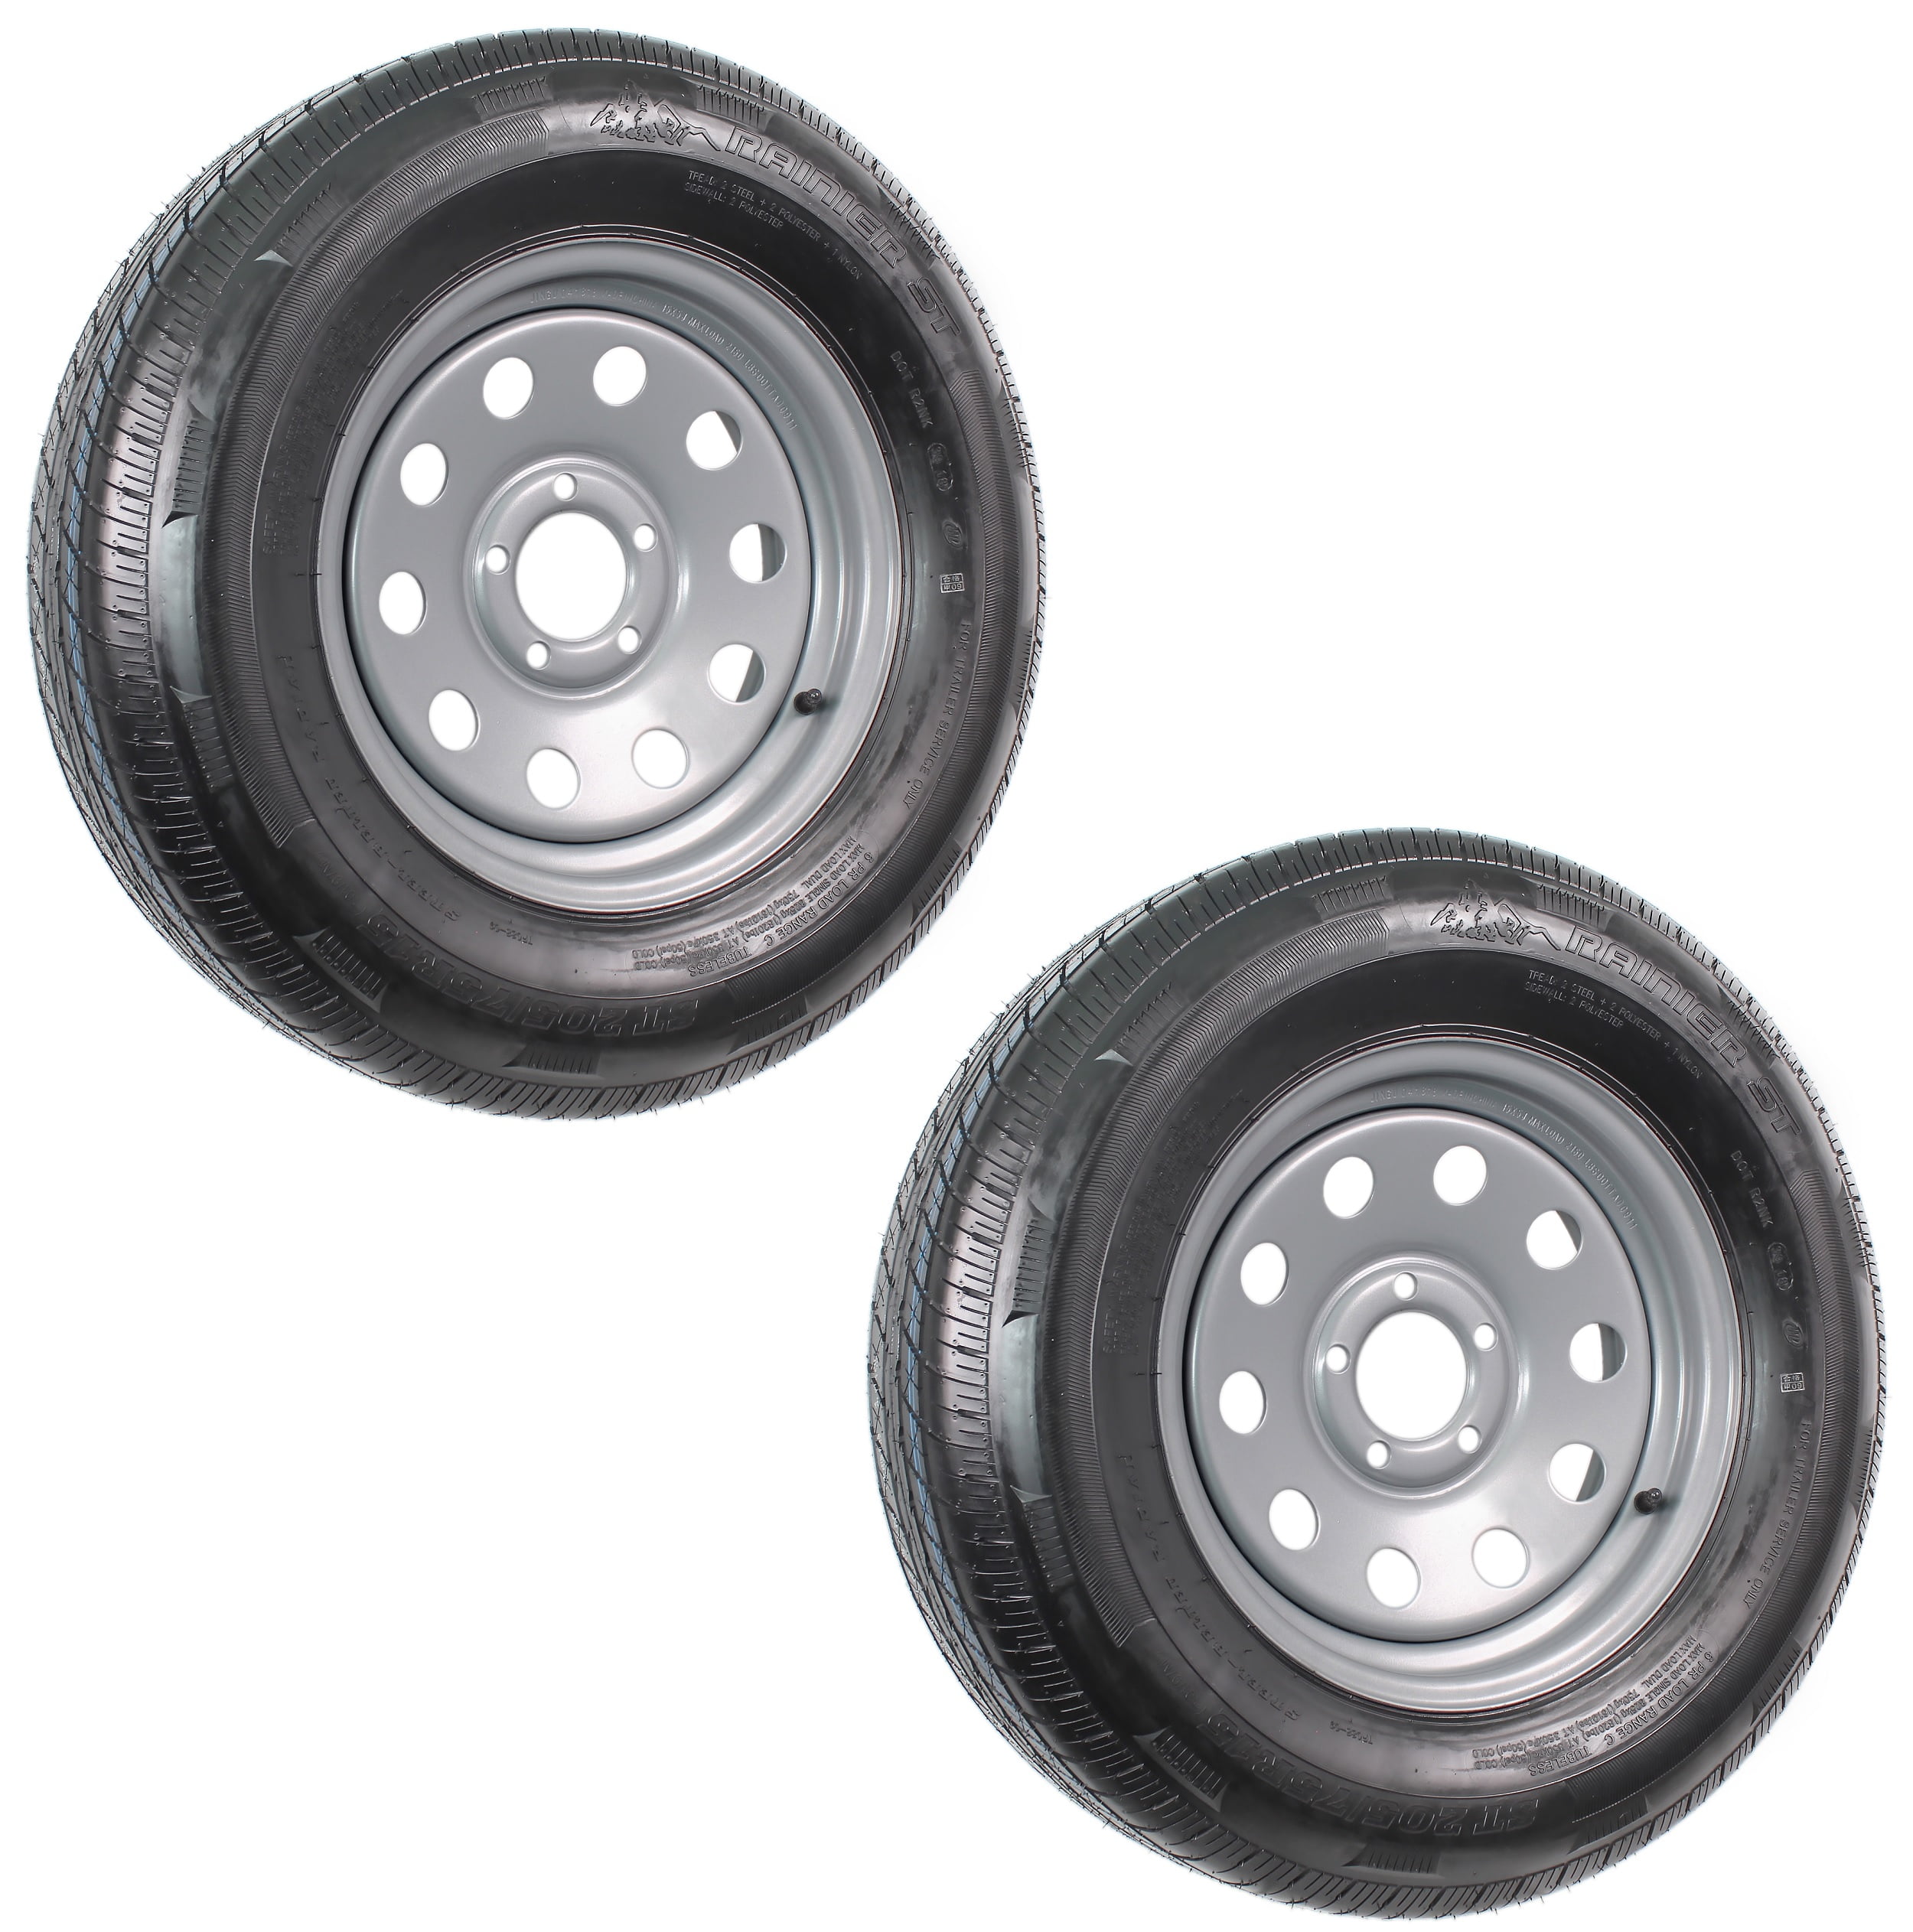 RADIAL trailer tire Approved mounted on 5 bolt GALVANIZED STEEL rim 205-75-15 ST205-75R15 D.O.T M.O.T 205-75R15 LOAD RANGE C High Speed 